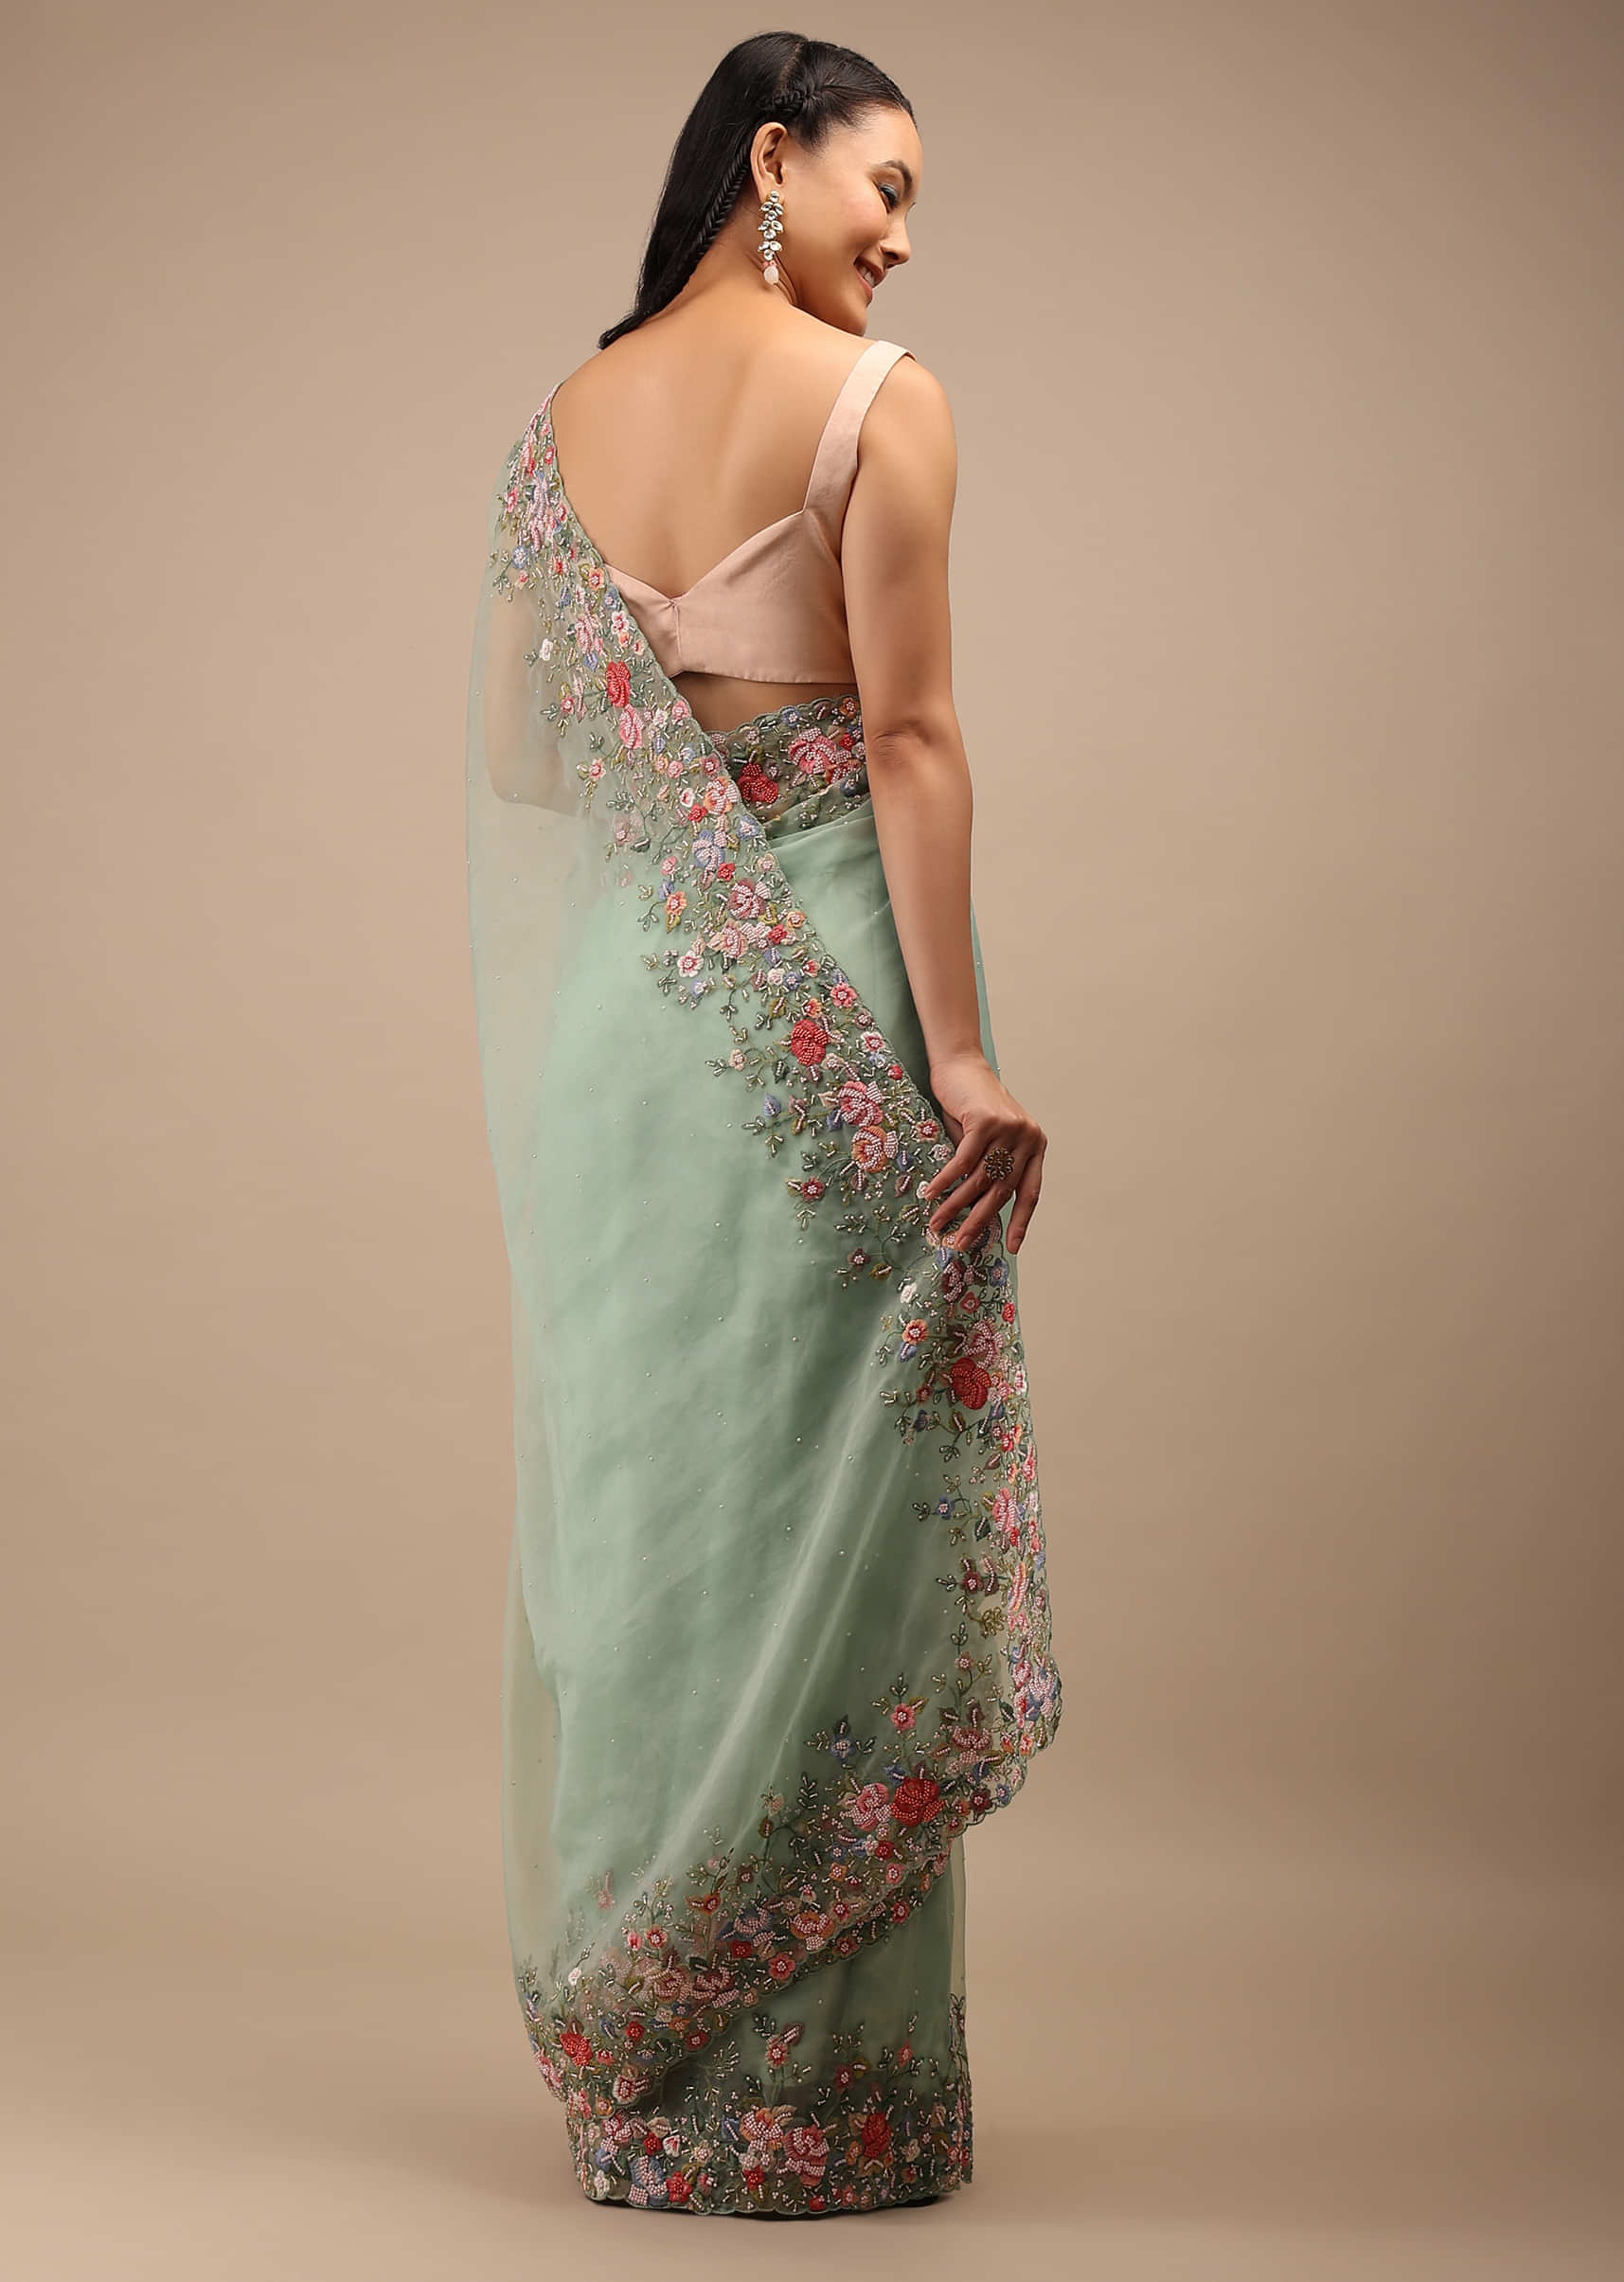 Mist Green Organza Saree In Multi-Color Resham Work Embroidery Detailing On The Border, 